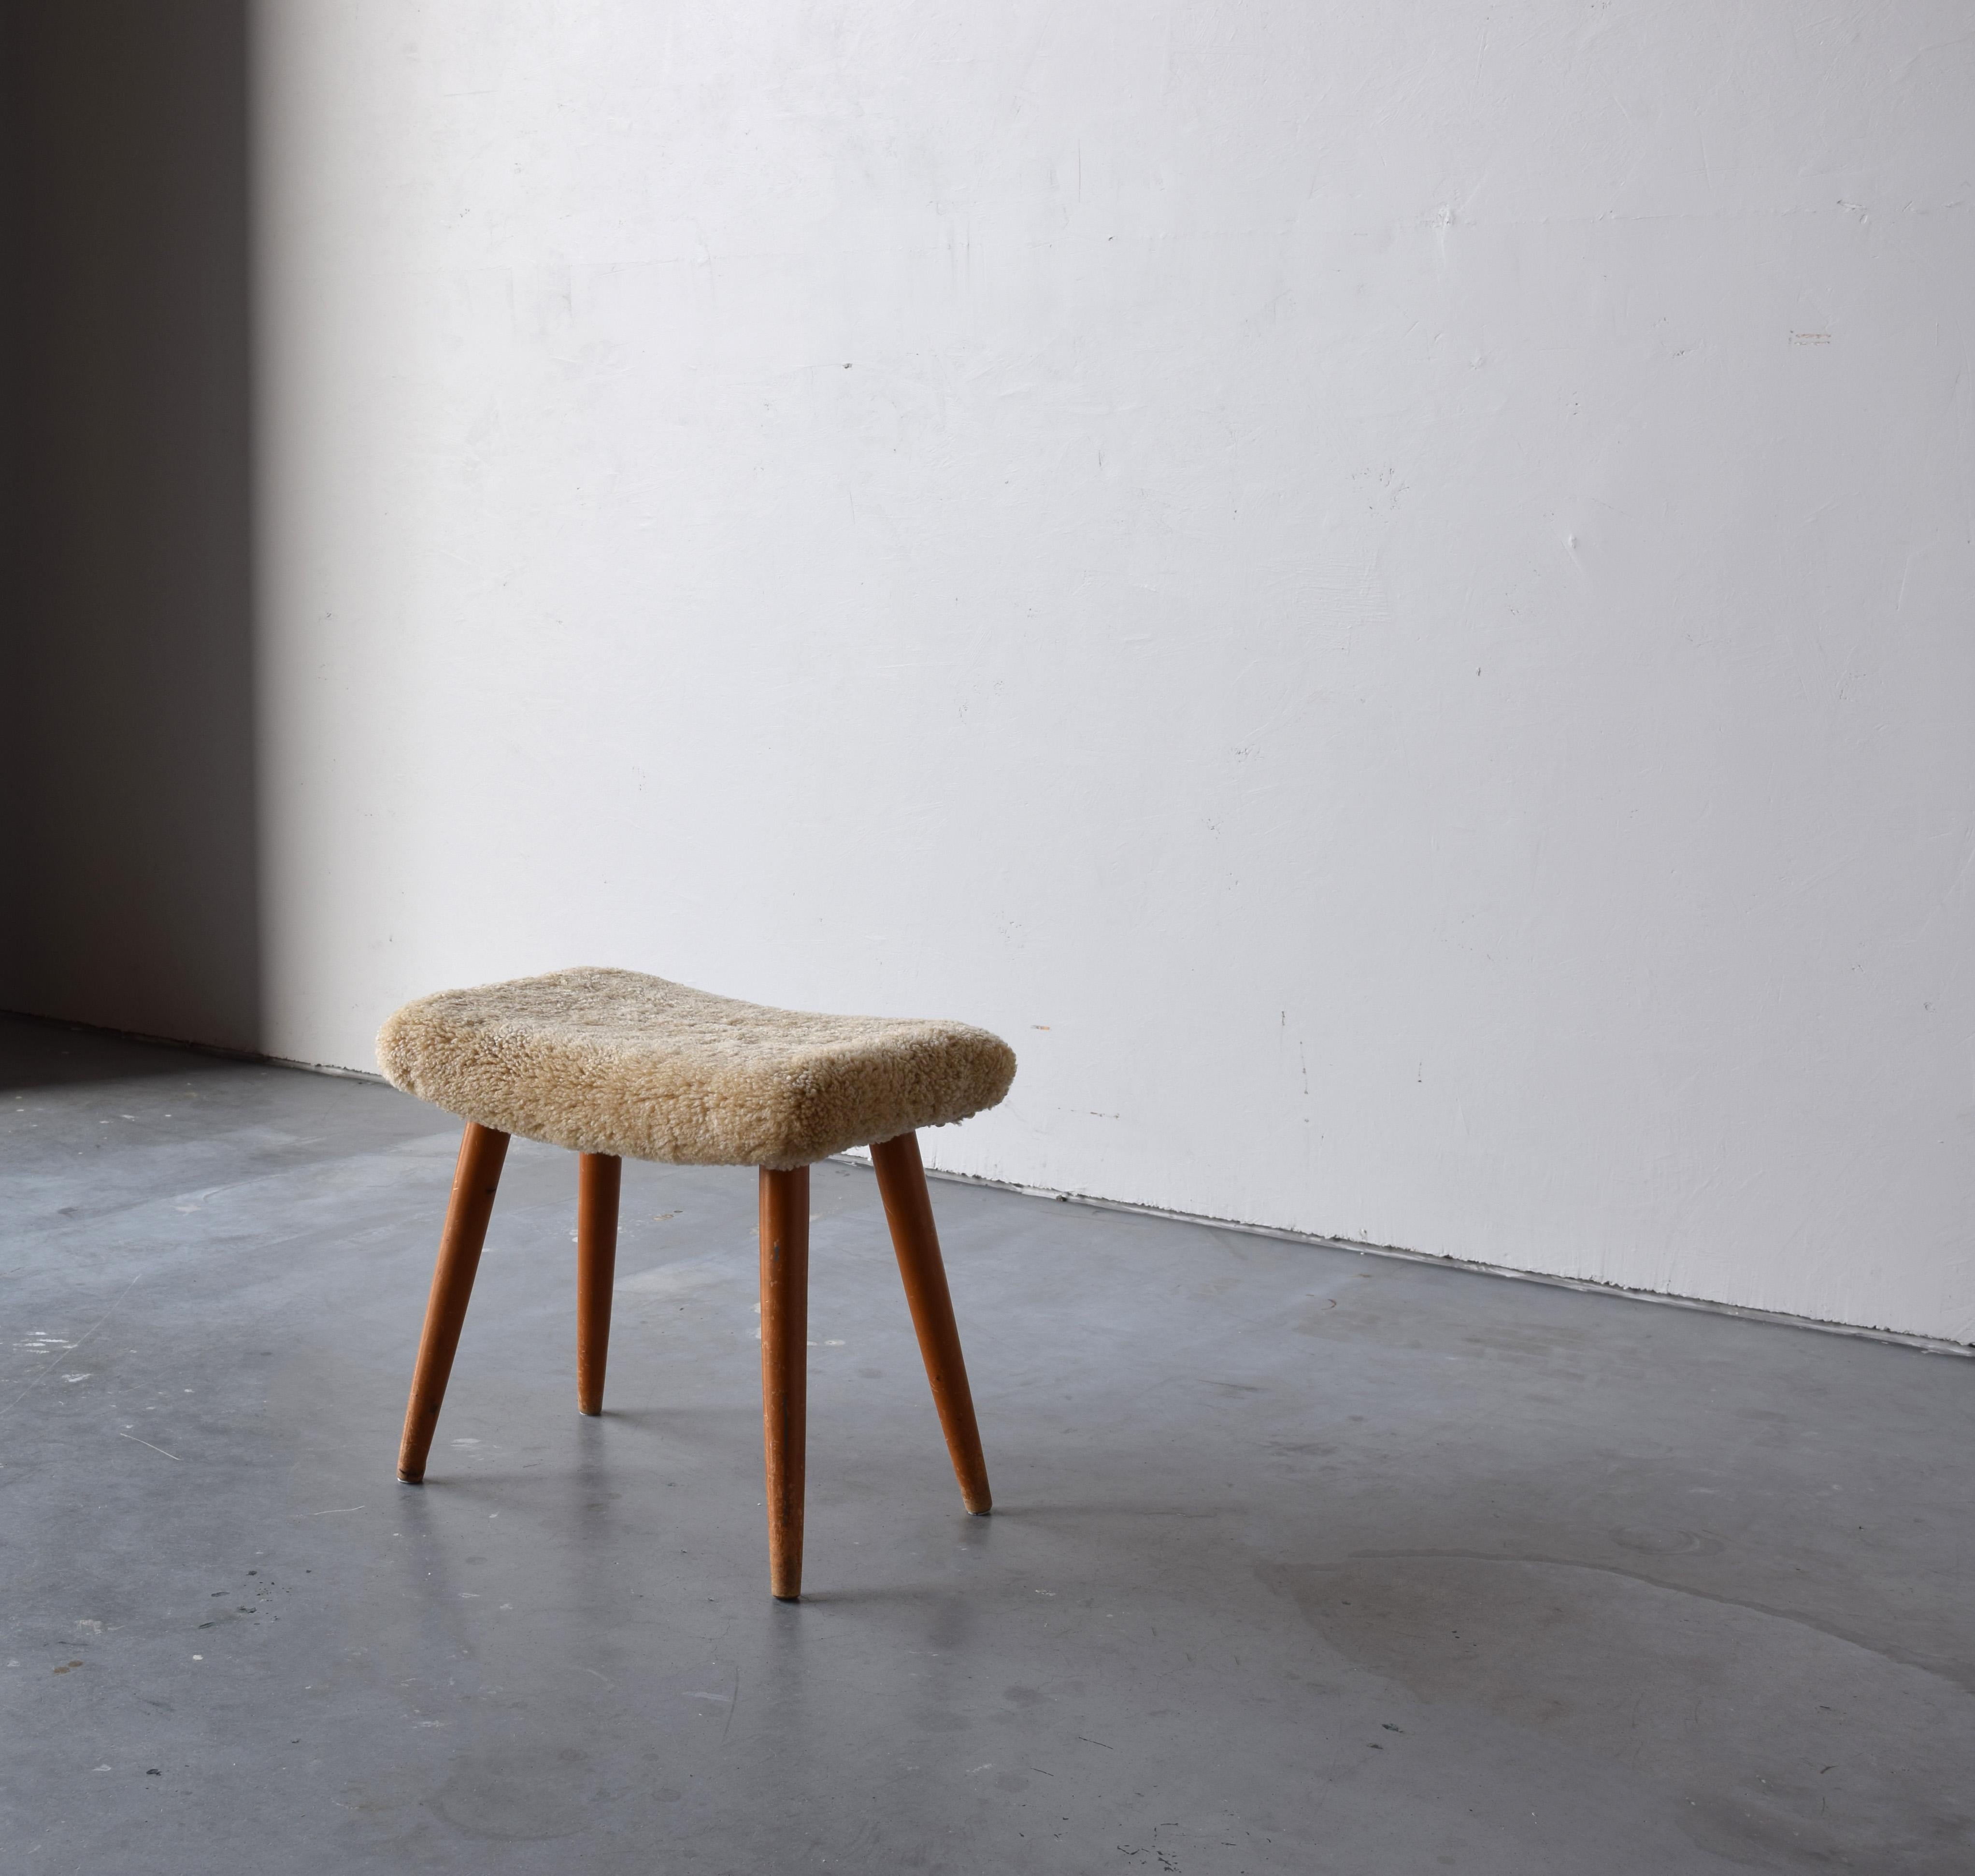 A stool in stained wood, overstuffed seat reupholstered in brand new sheepskin upholstery. Produced in Sweden, 1950s.

Other designers of the period include Finn Juhl, Hans Wegner, Isamu Noguchi, Charlotte Perriand.